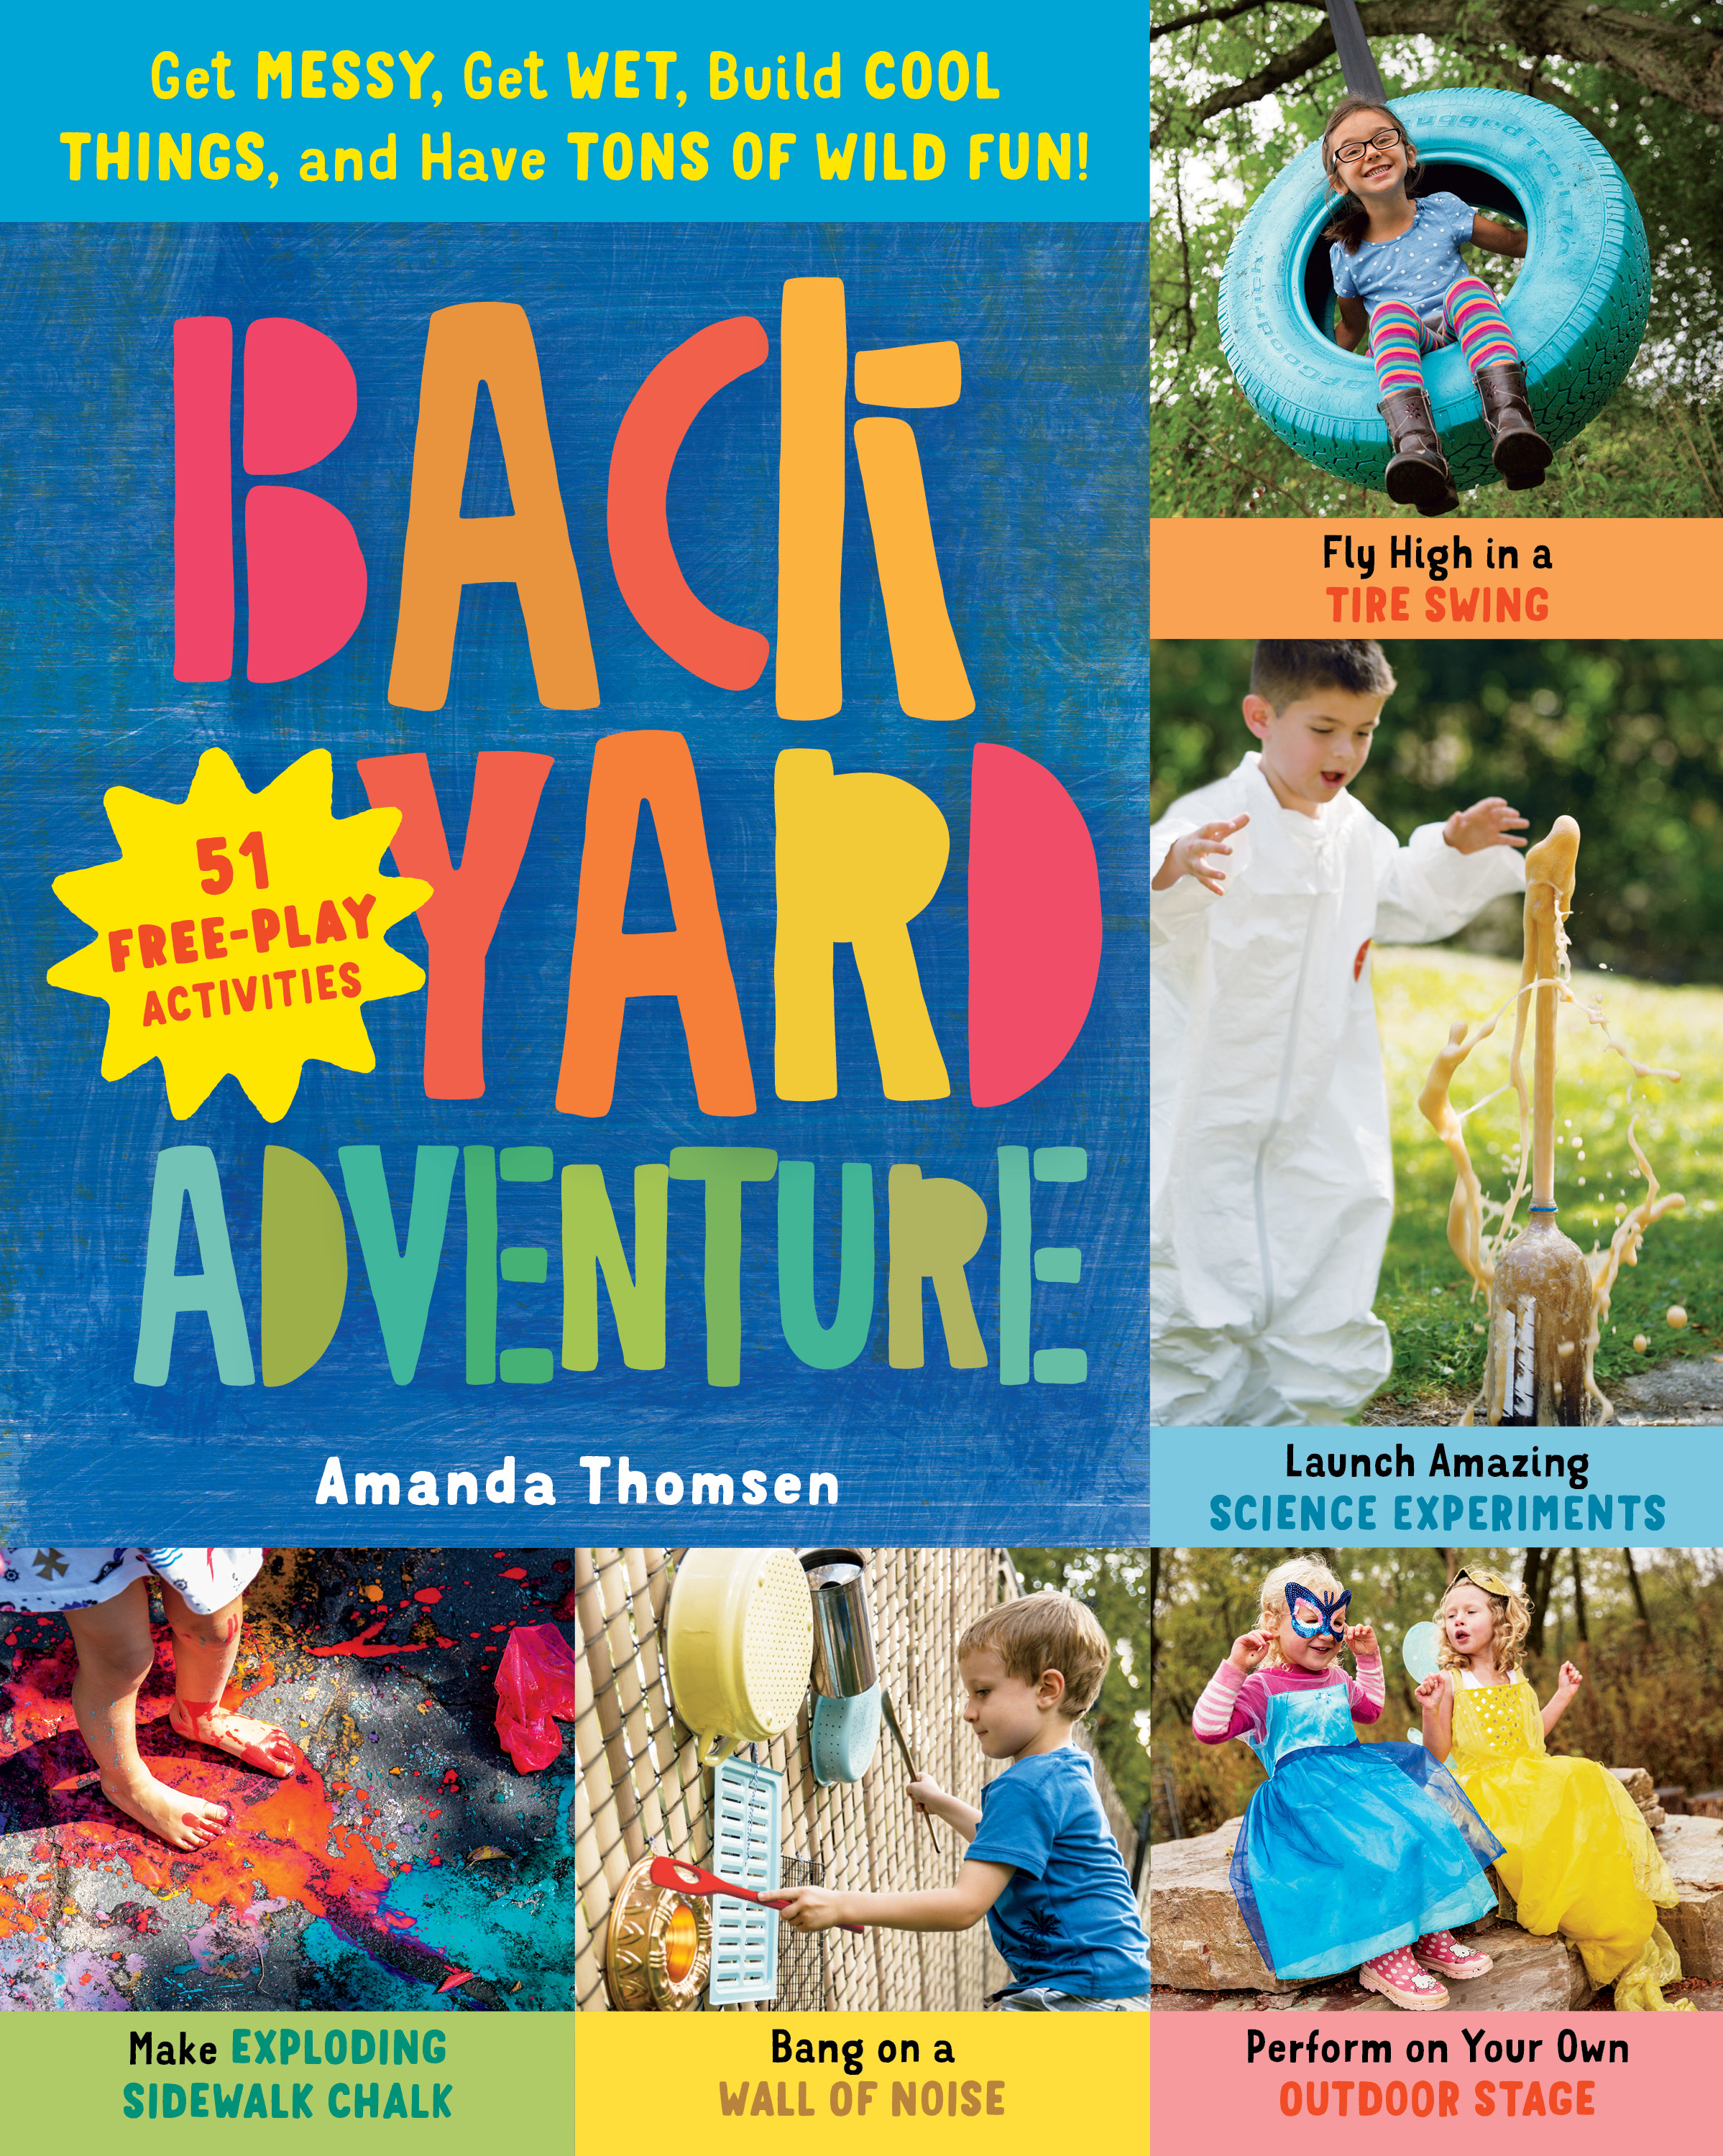 Umschlagbild für Backyard Adventure [electronic resource] : Get Messy, Get Wet, Build Cool Things, and Have Tons of Wild Fun! 51 Free-Play Activities